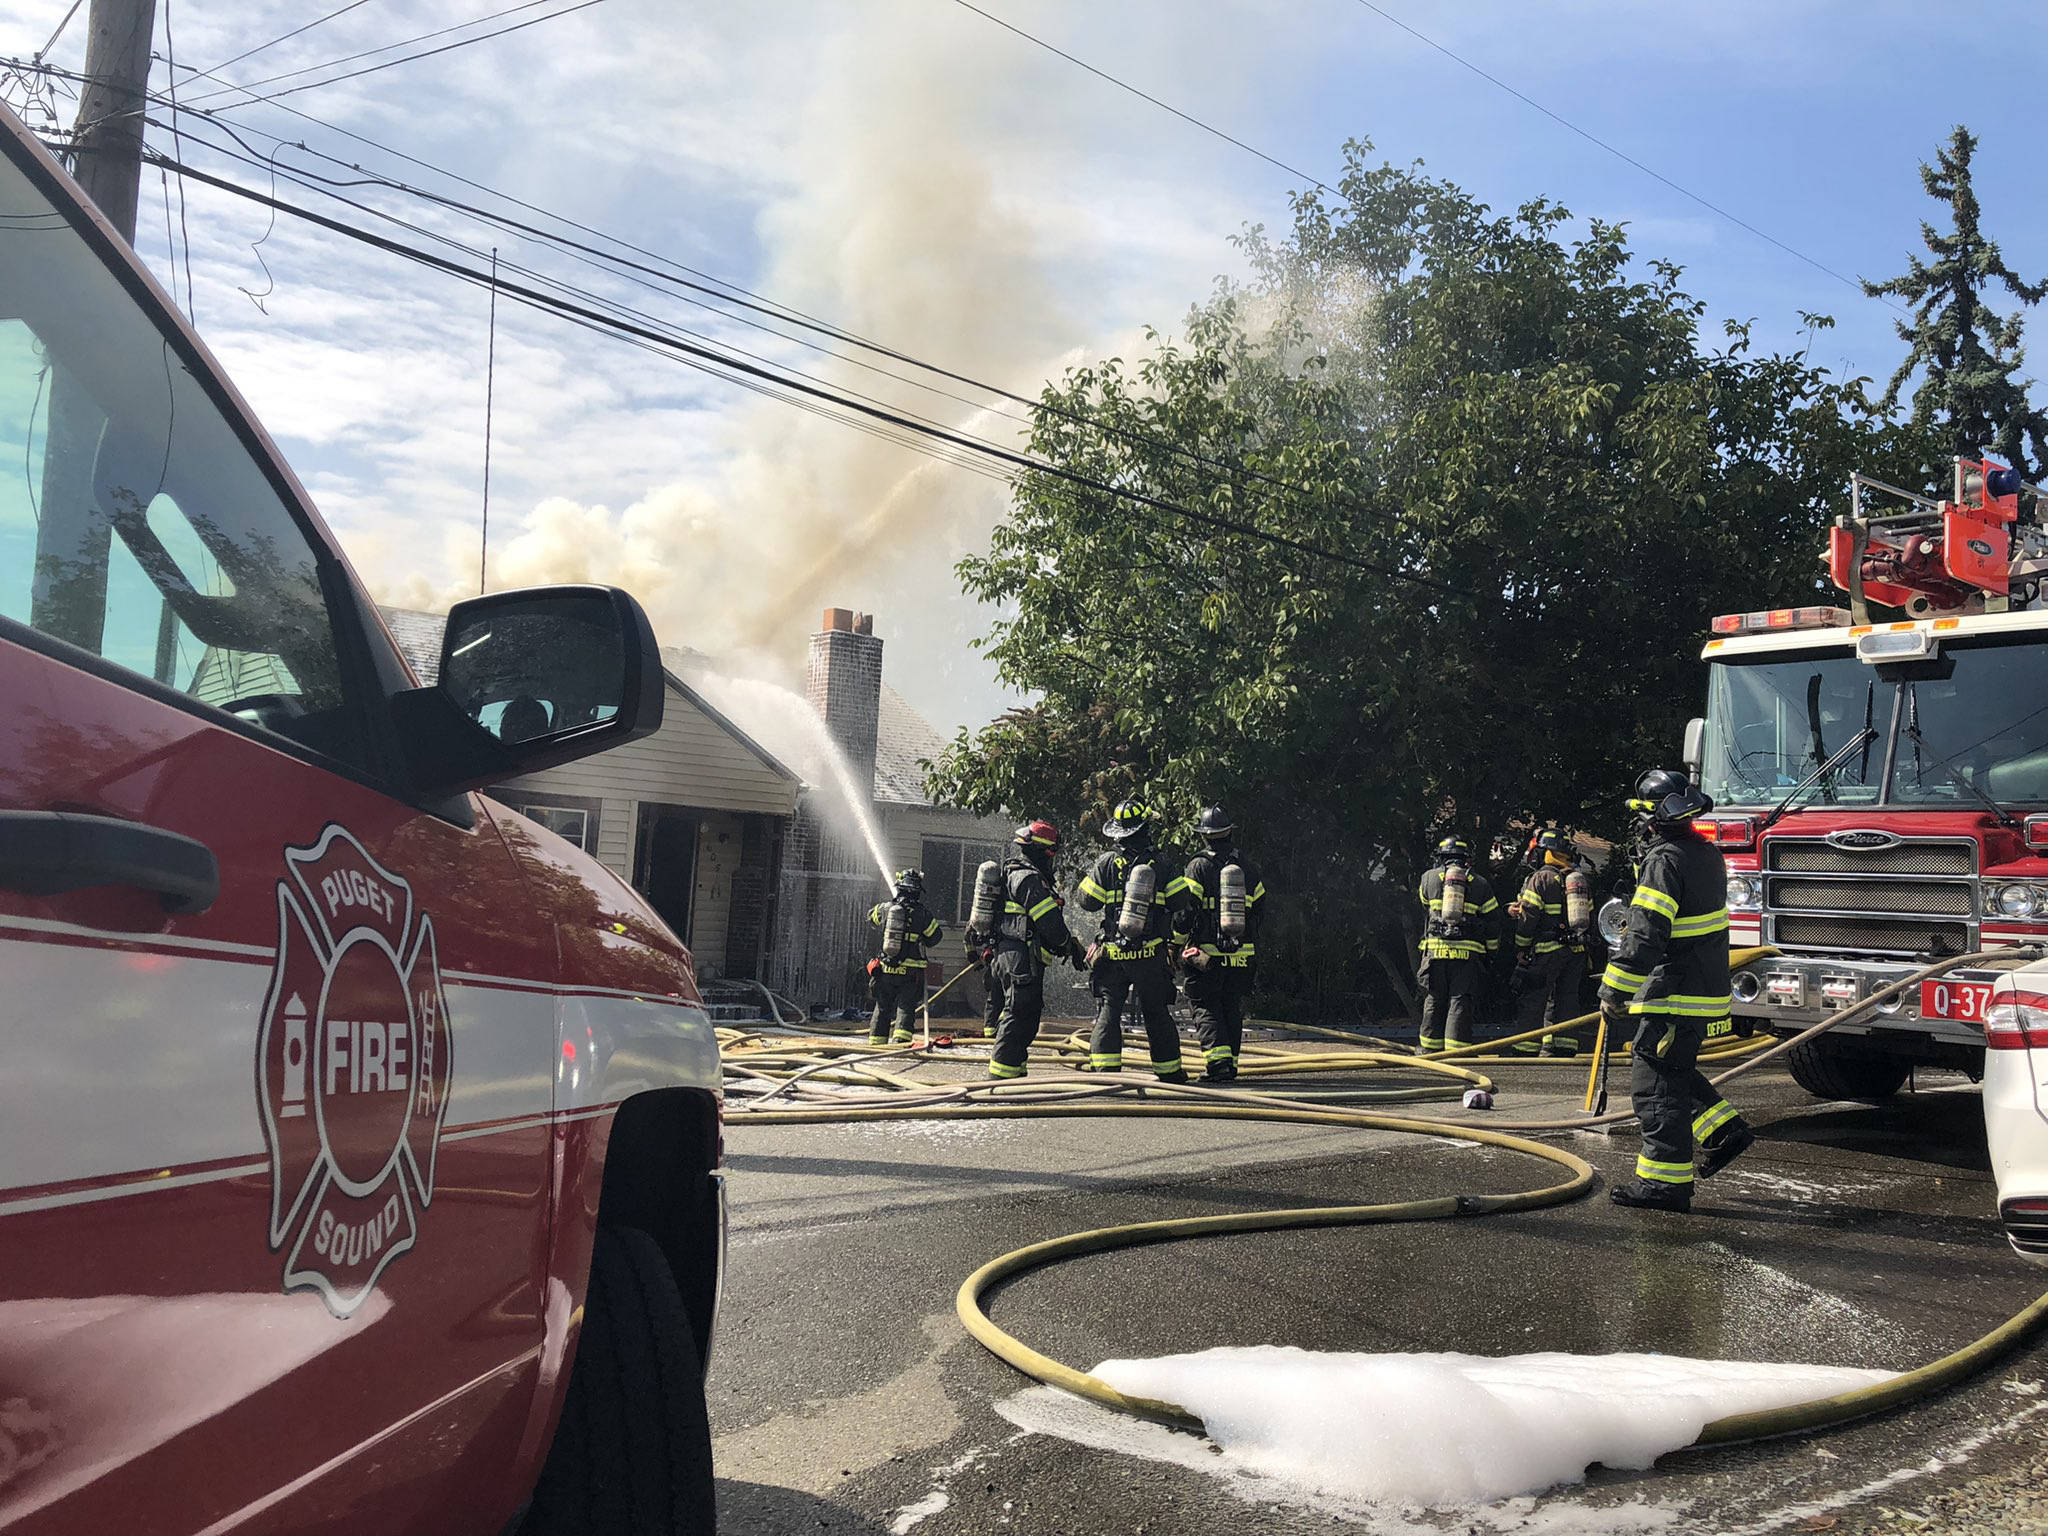 Firefighters respond Aug. 18 to a house fire in the 600 block of Prospect Avenue North in Kent. COURTESY PHOTO, Puget Sound Fire